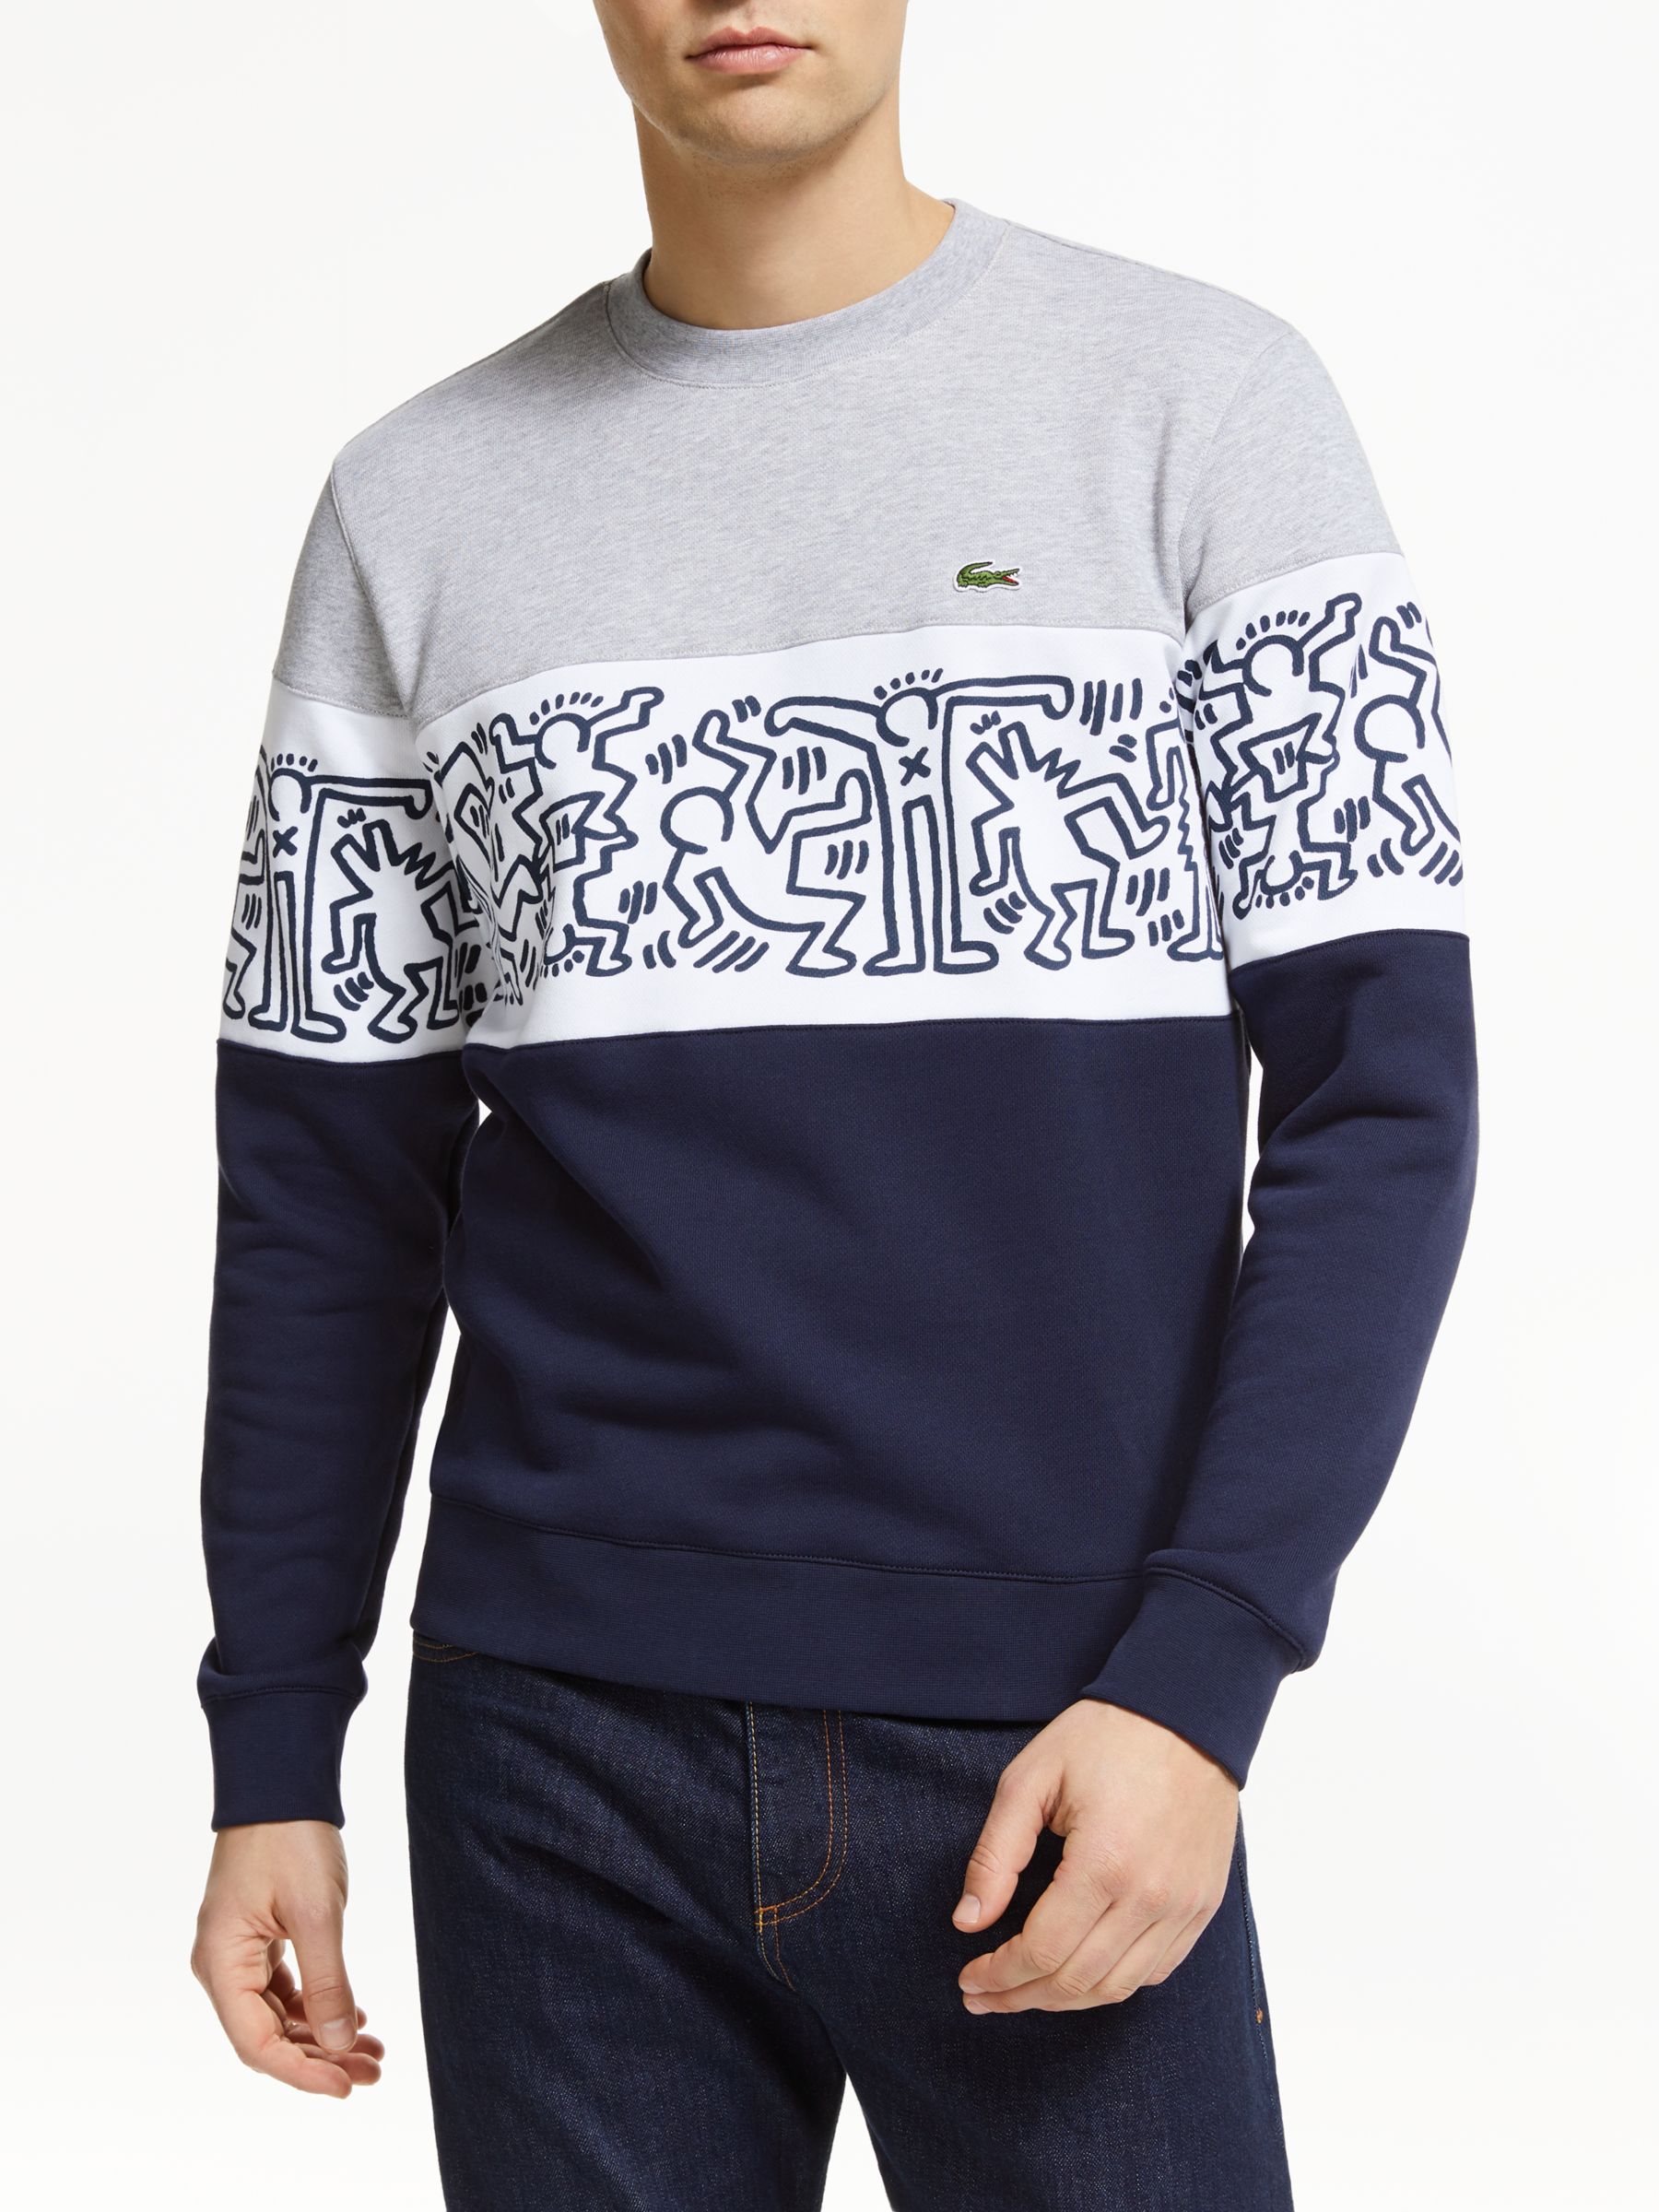 lacoste keith haring sweater